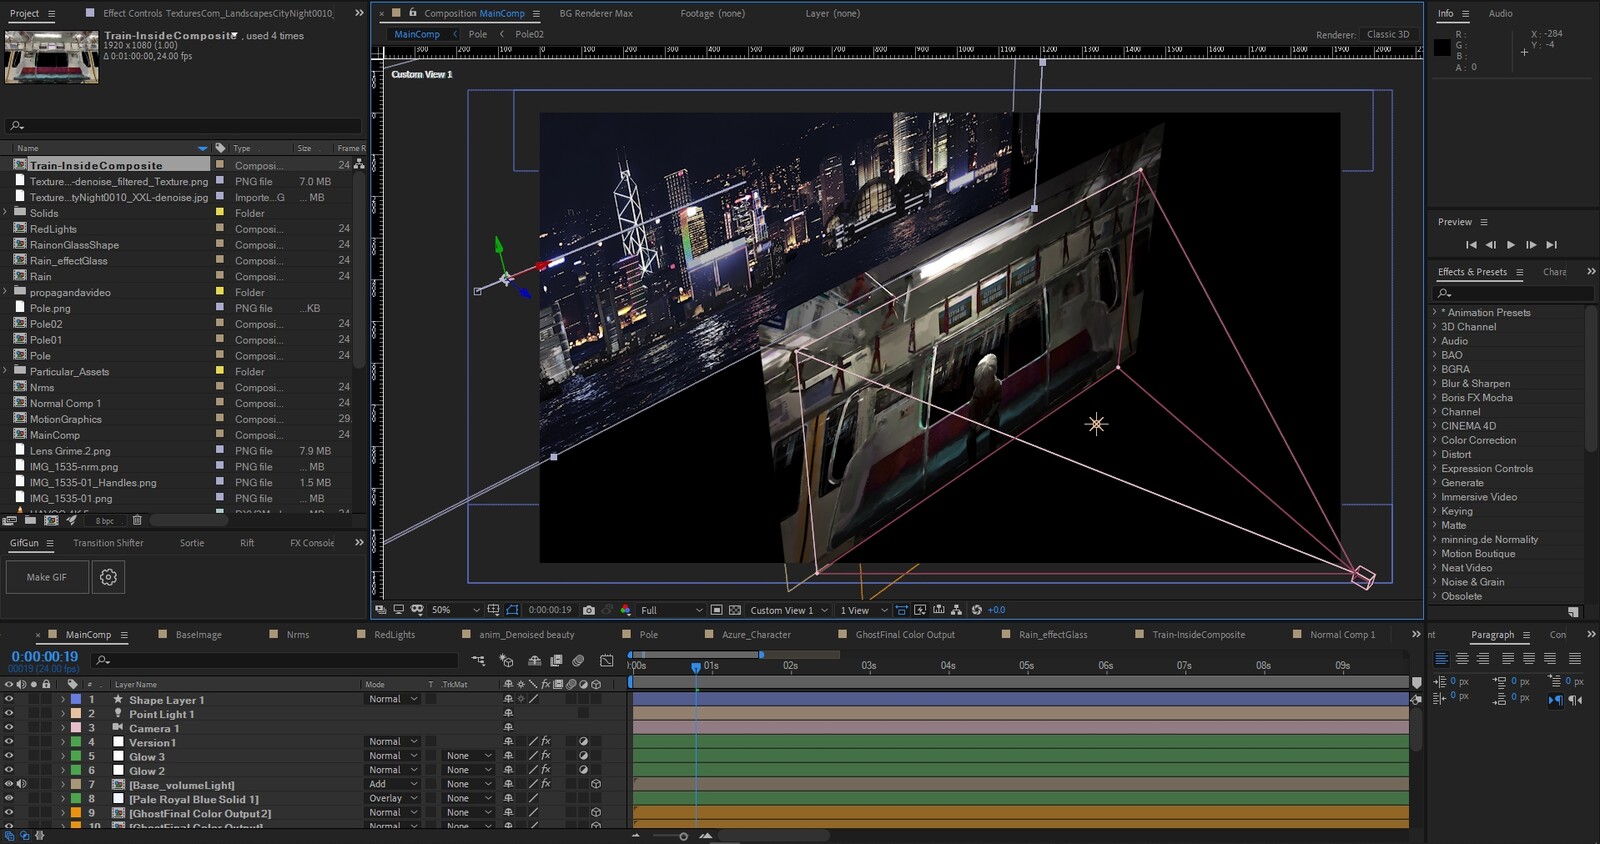 AfterEffects scene. This was never intended to be a professional job... just for fun... hence the mess!